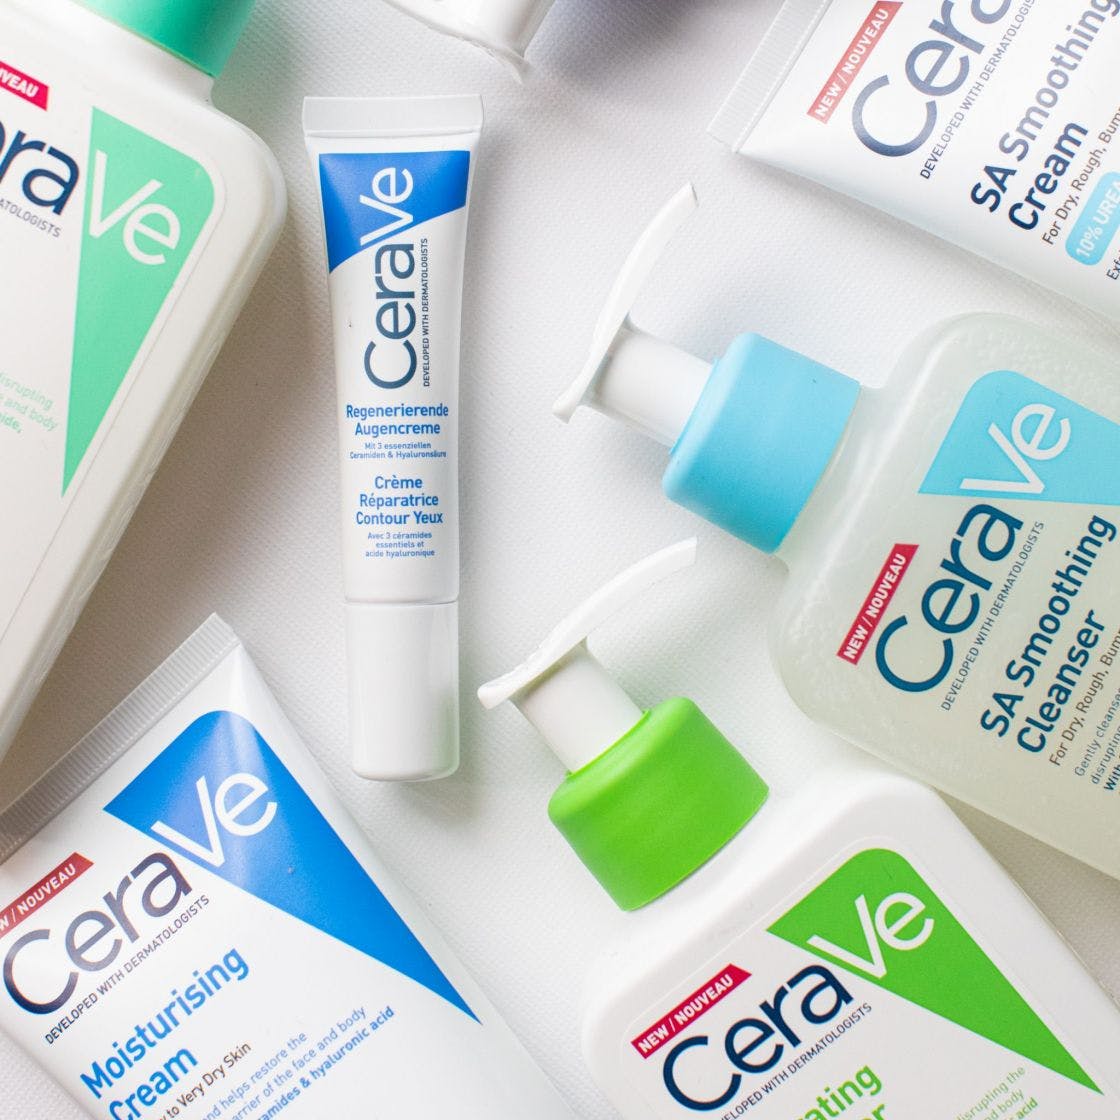 Ceraveproducts